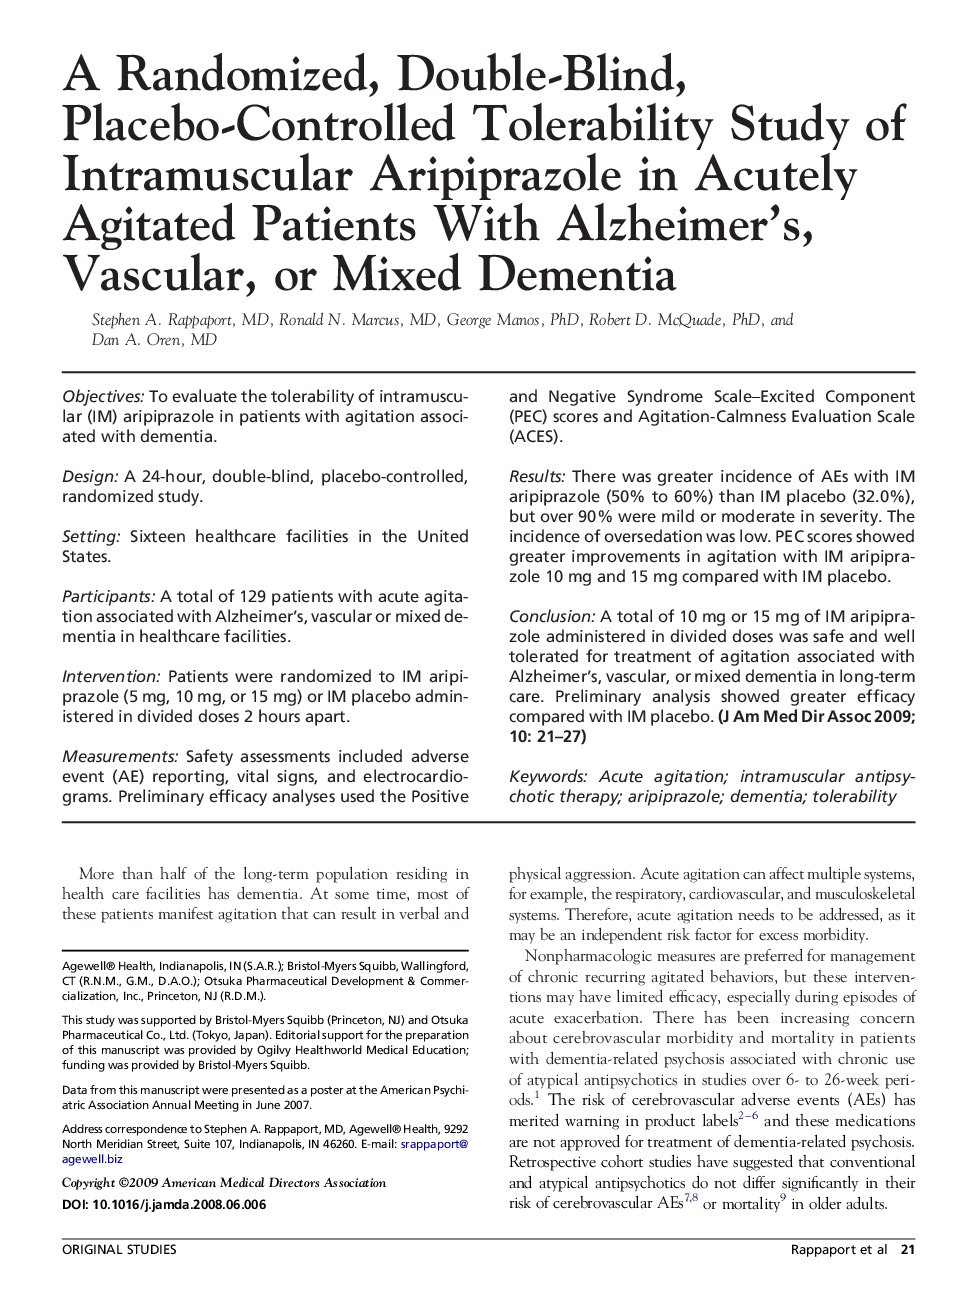 A Randomized, Double-Blind, Placebo-Controlled Tolerability Study of Intramuscular Aripiprazole in Acutely Agitated Patients With Alzheimer's, Vascular, or Mixed Dementia